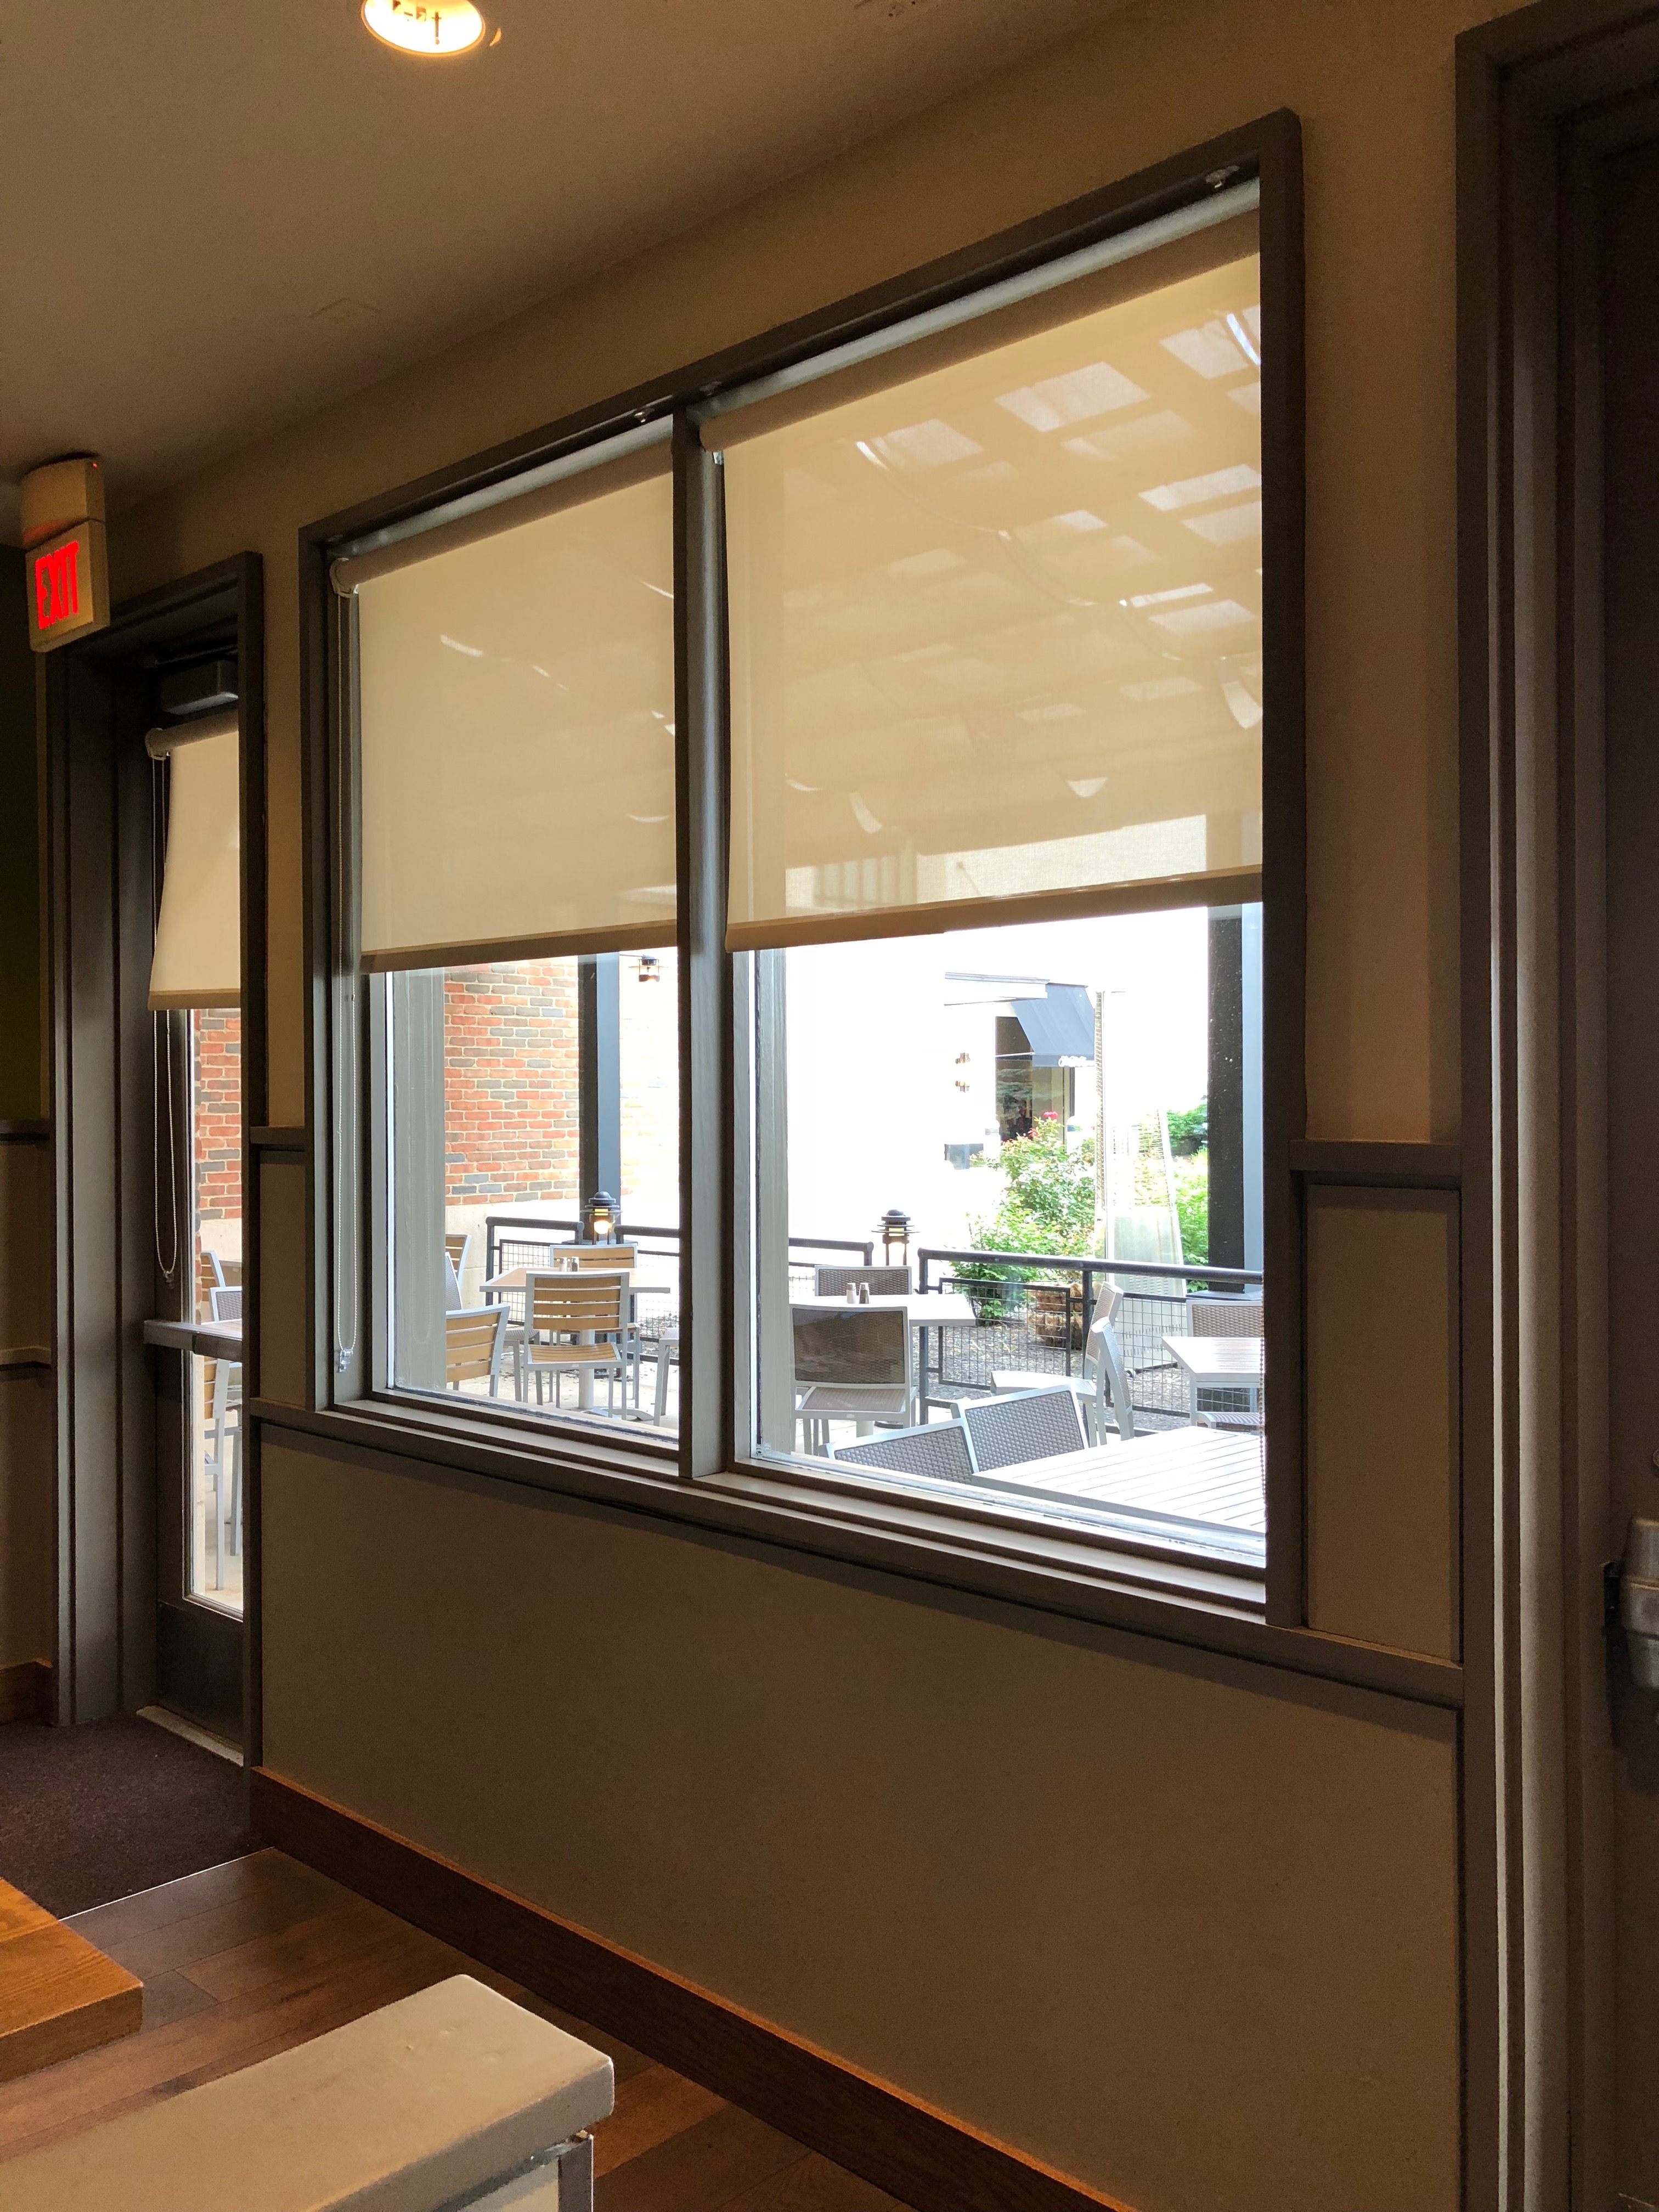 Commercial blinds and shades